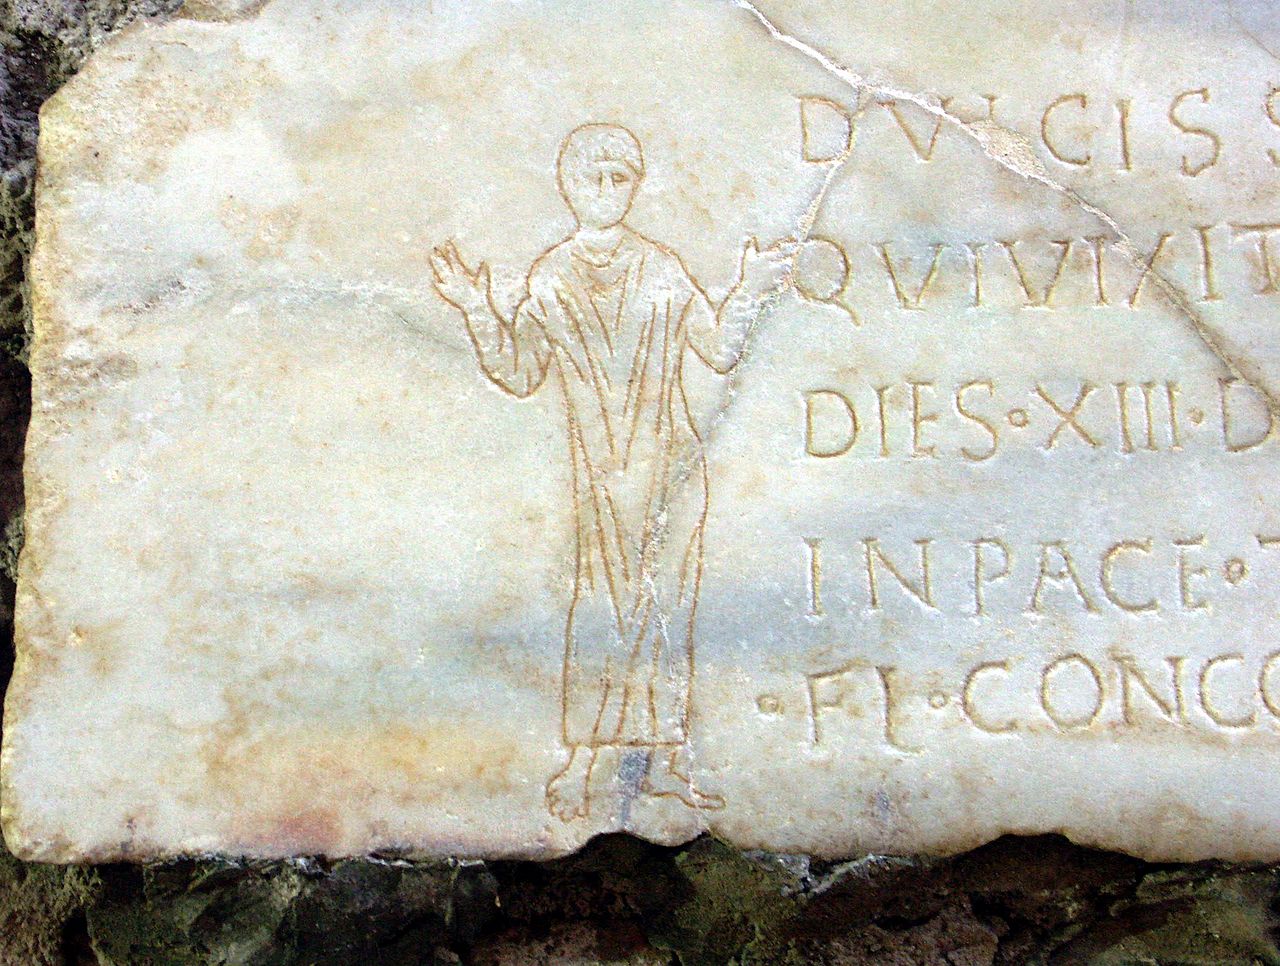 Praying Christian (Orans) from a gravestone in the Catacombs of Domitilla